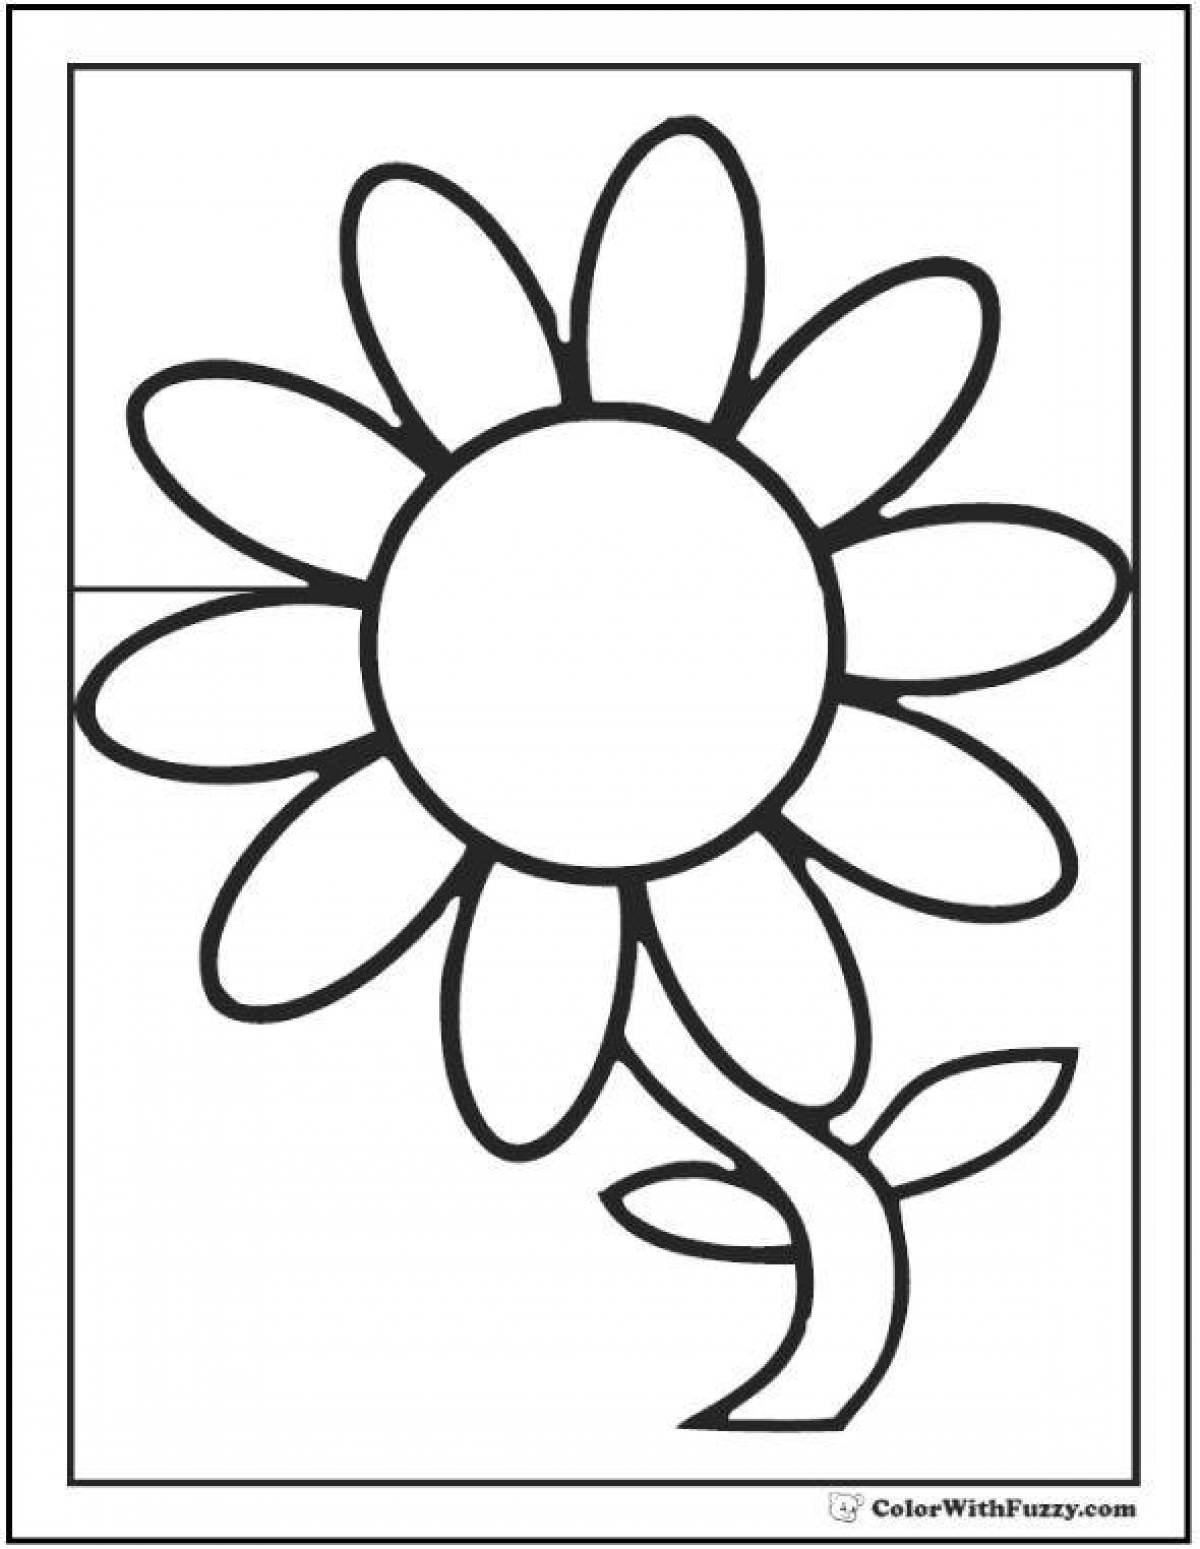 Colouring page with amazing chamomile pattern